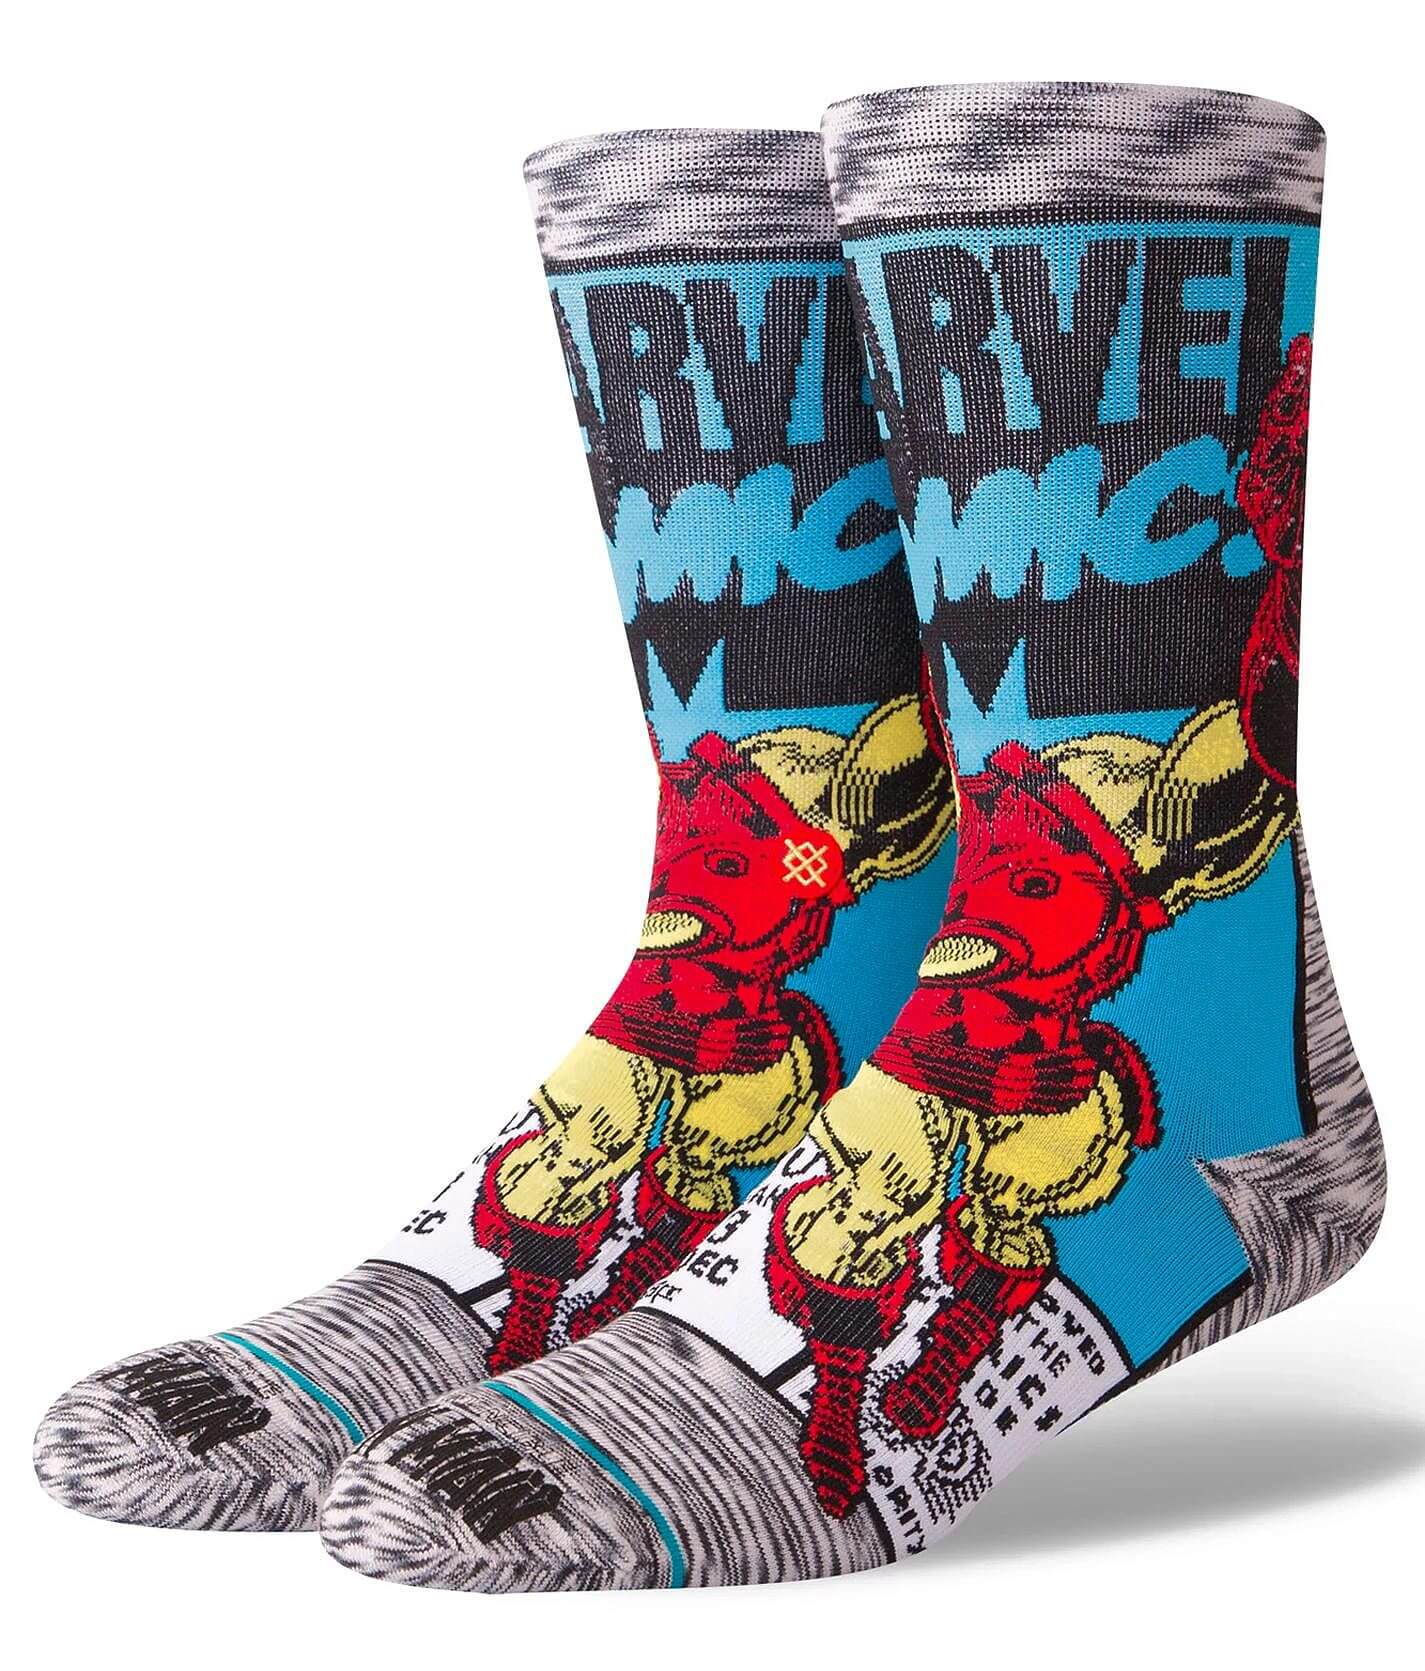 Stance MARVEL Invincible Iron Man socks Limited Series mens size large NEW!! 